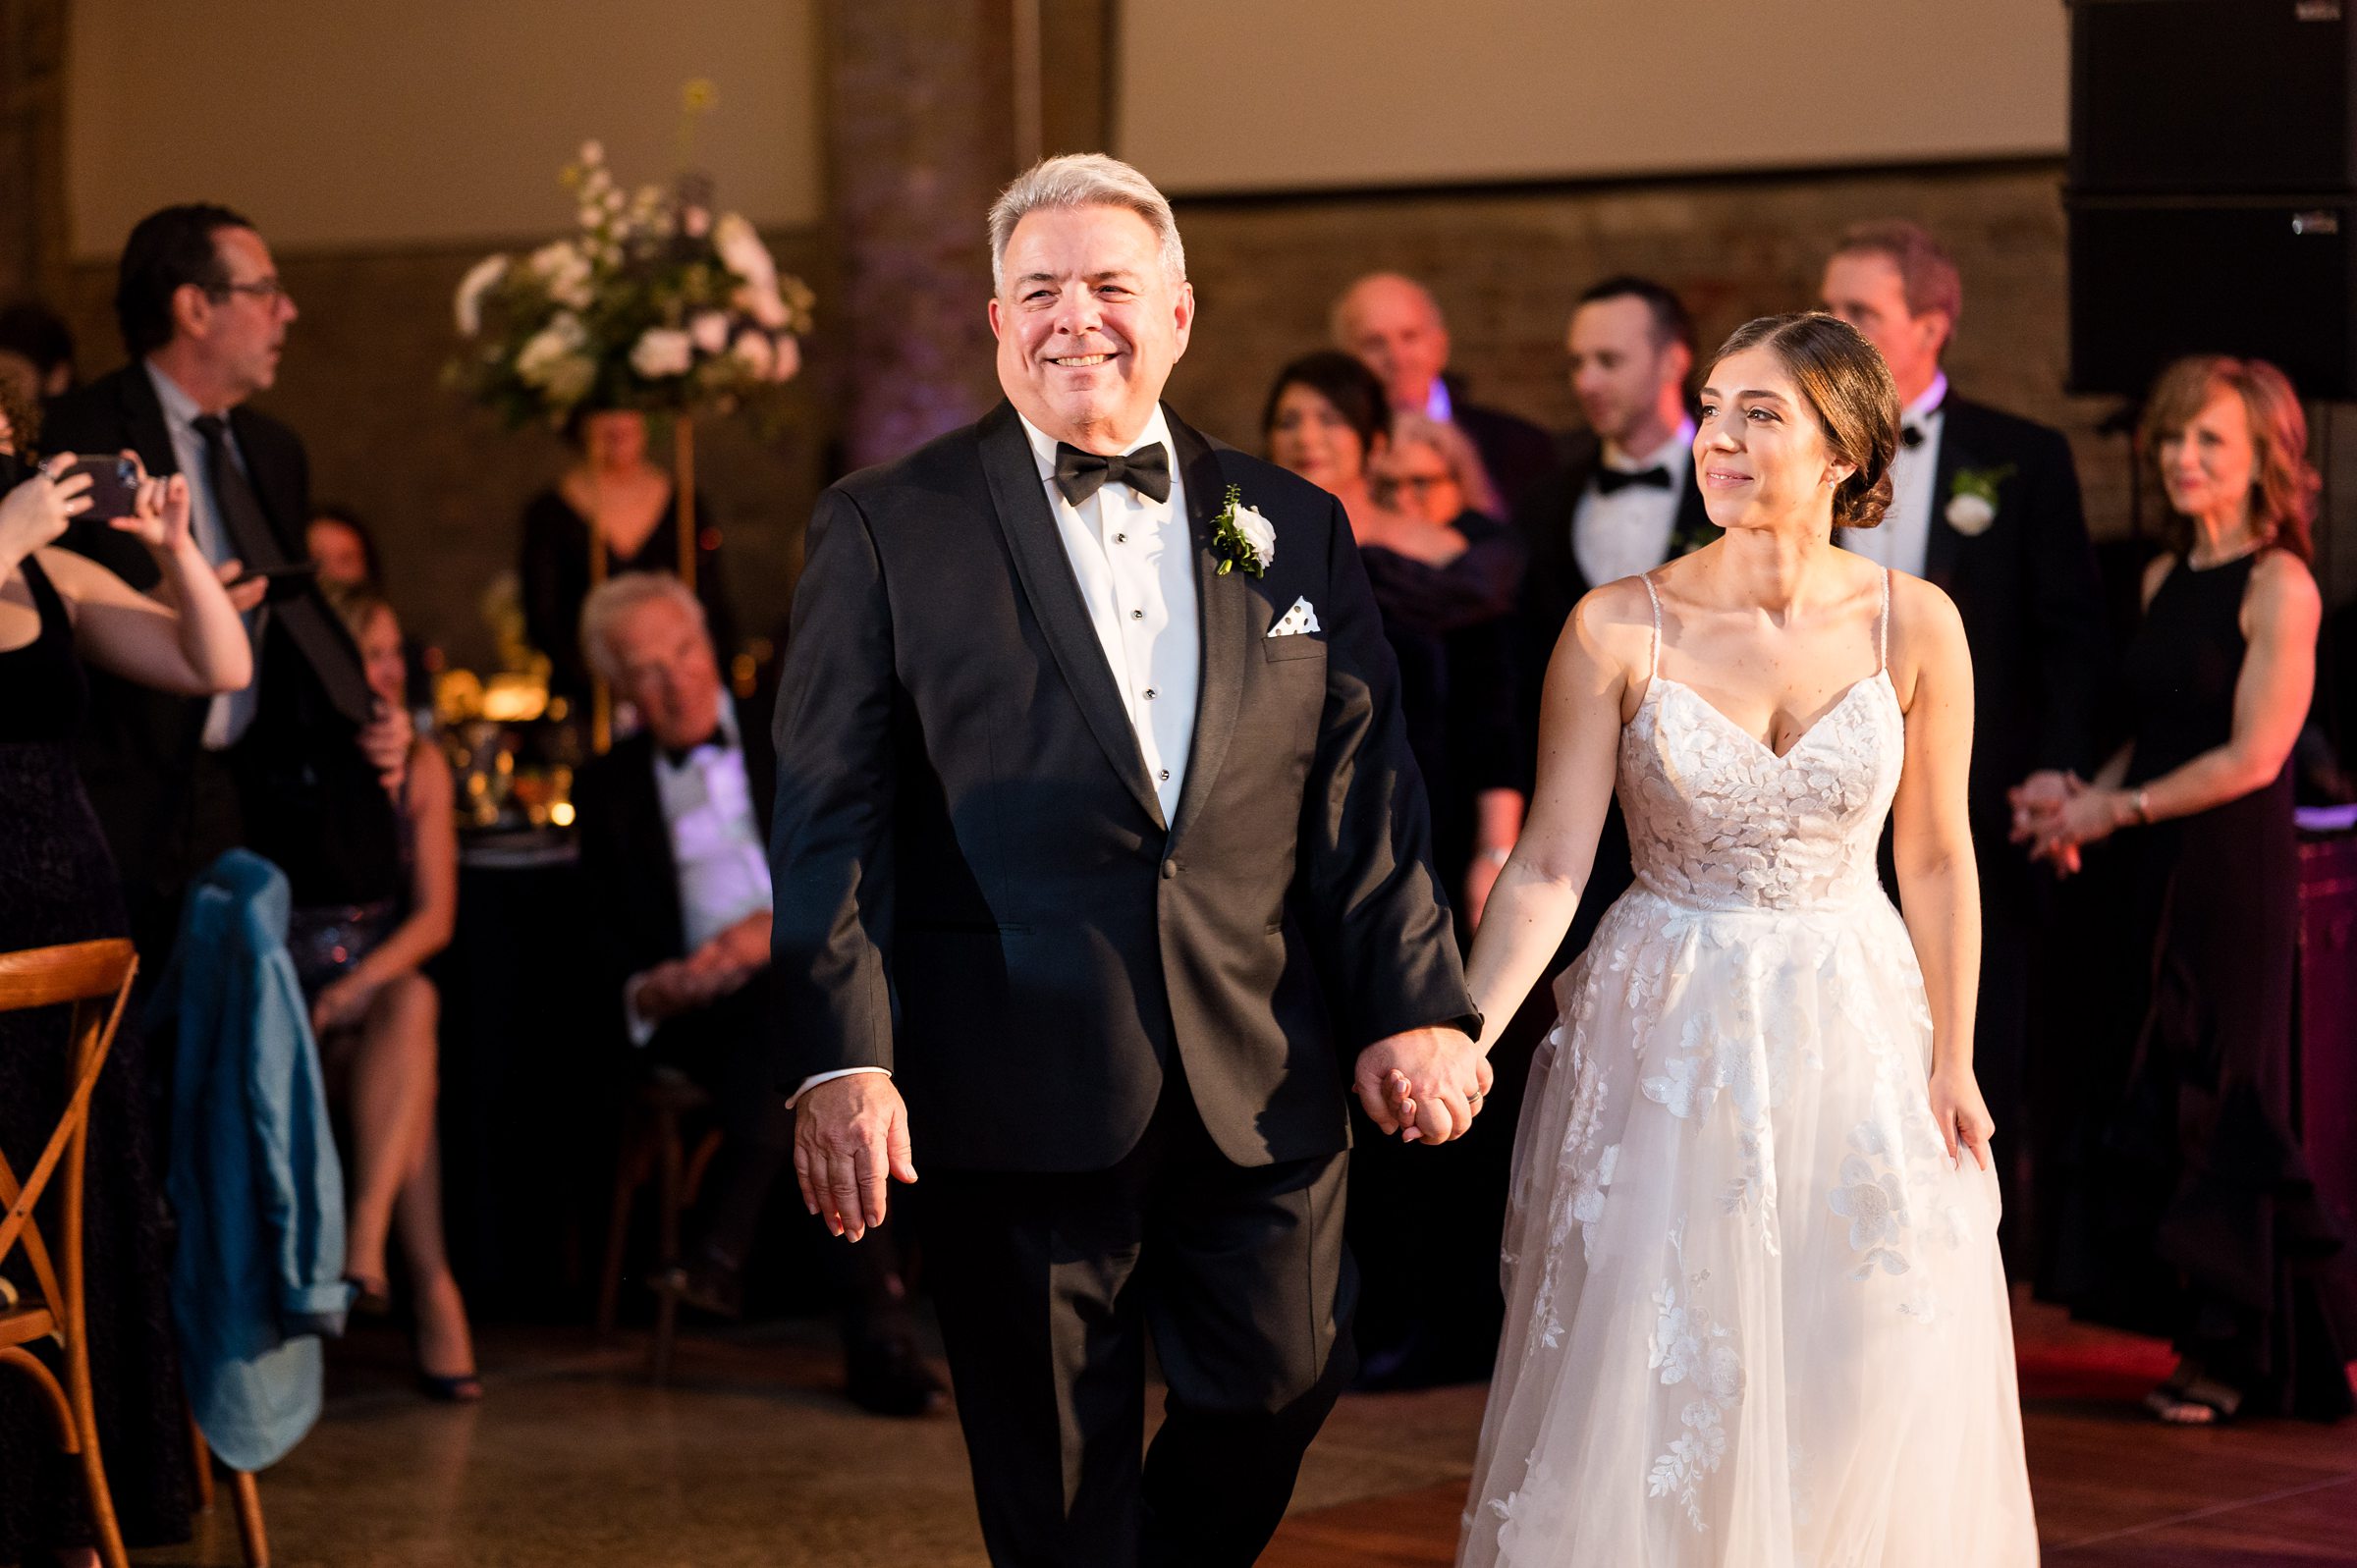 At a Lilah Events wedding, the bride and her father gracefully walk down the aisle at the reception.